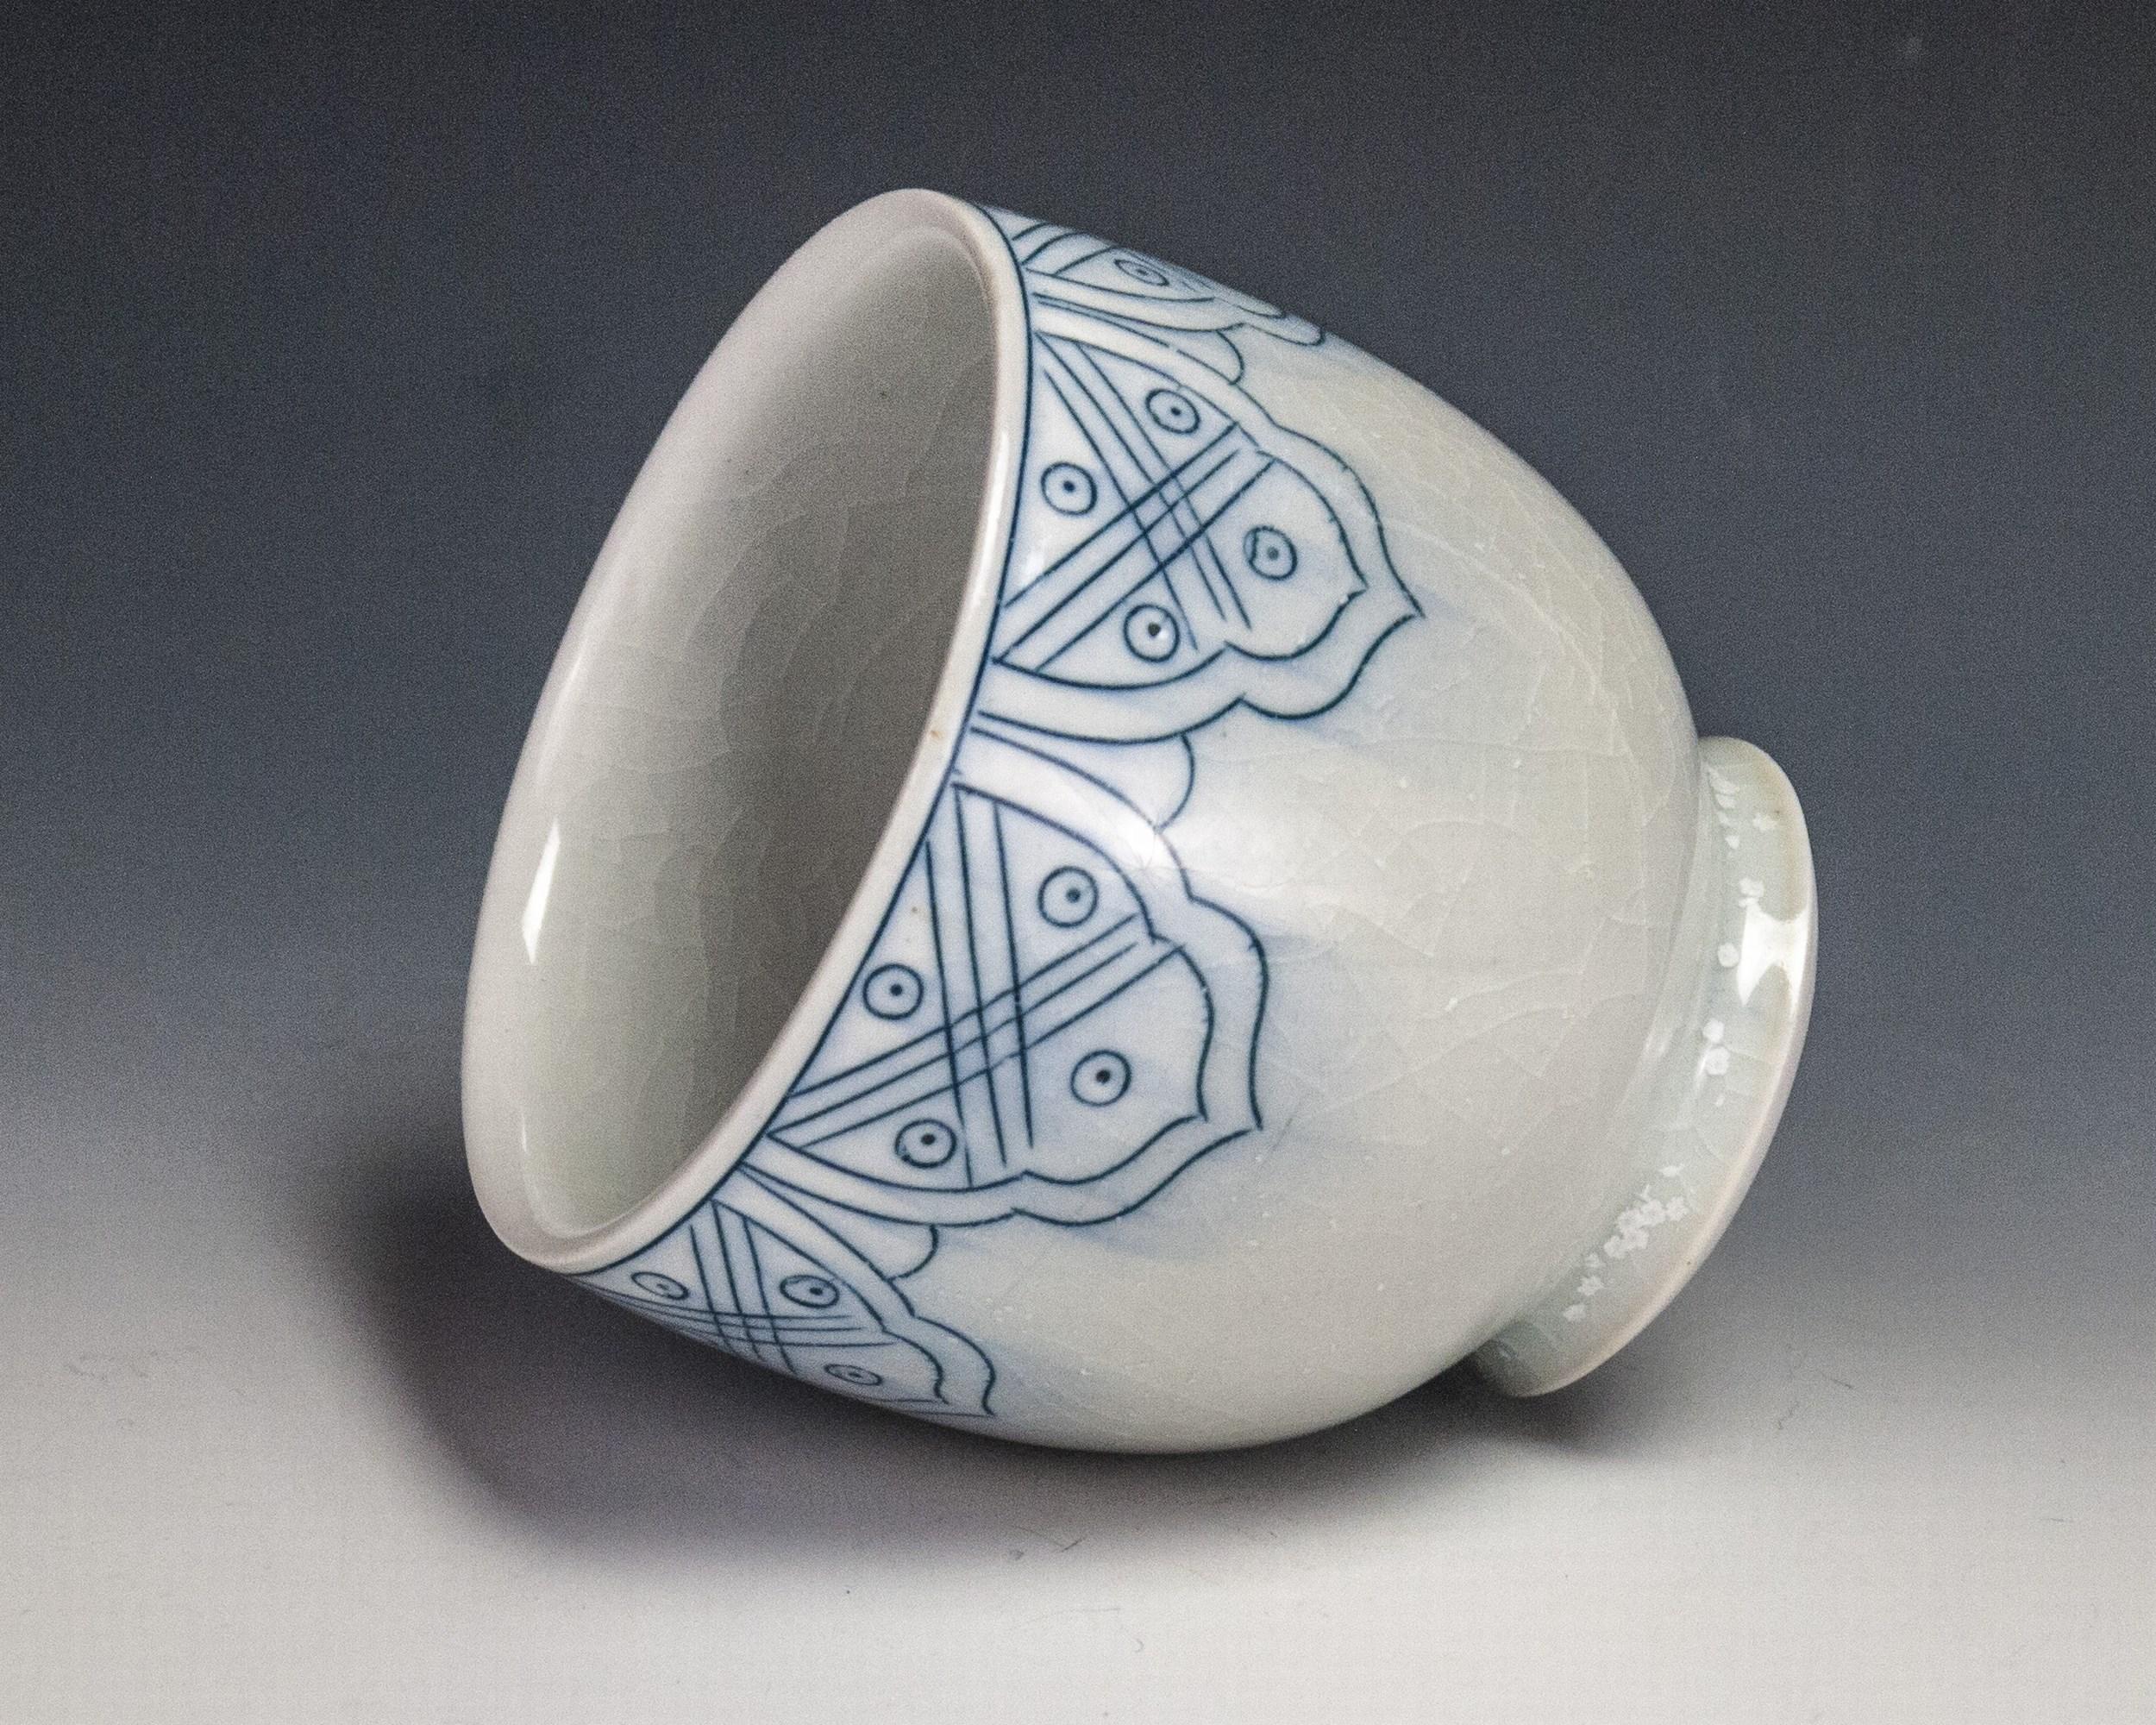 Sgraffito 
Materials: Porcelain and Glaze
Date: 2018

Steven Young Lee has been the resident artist director of the Archie Bray Foundation for the Ceramic Arts in Helena, Montana since 2006. In 2004-05, he lectured and taught at numerous